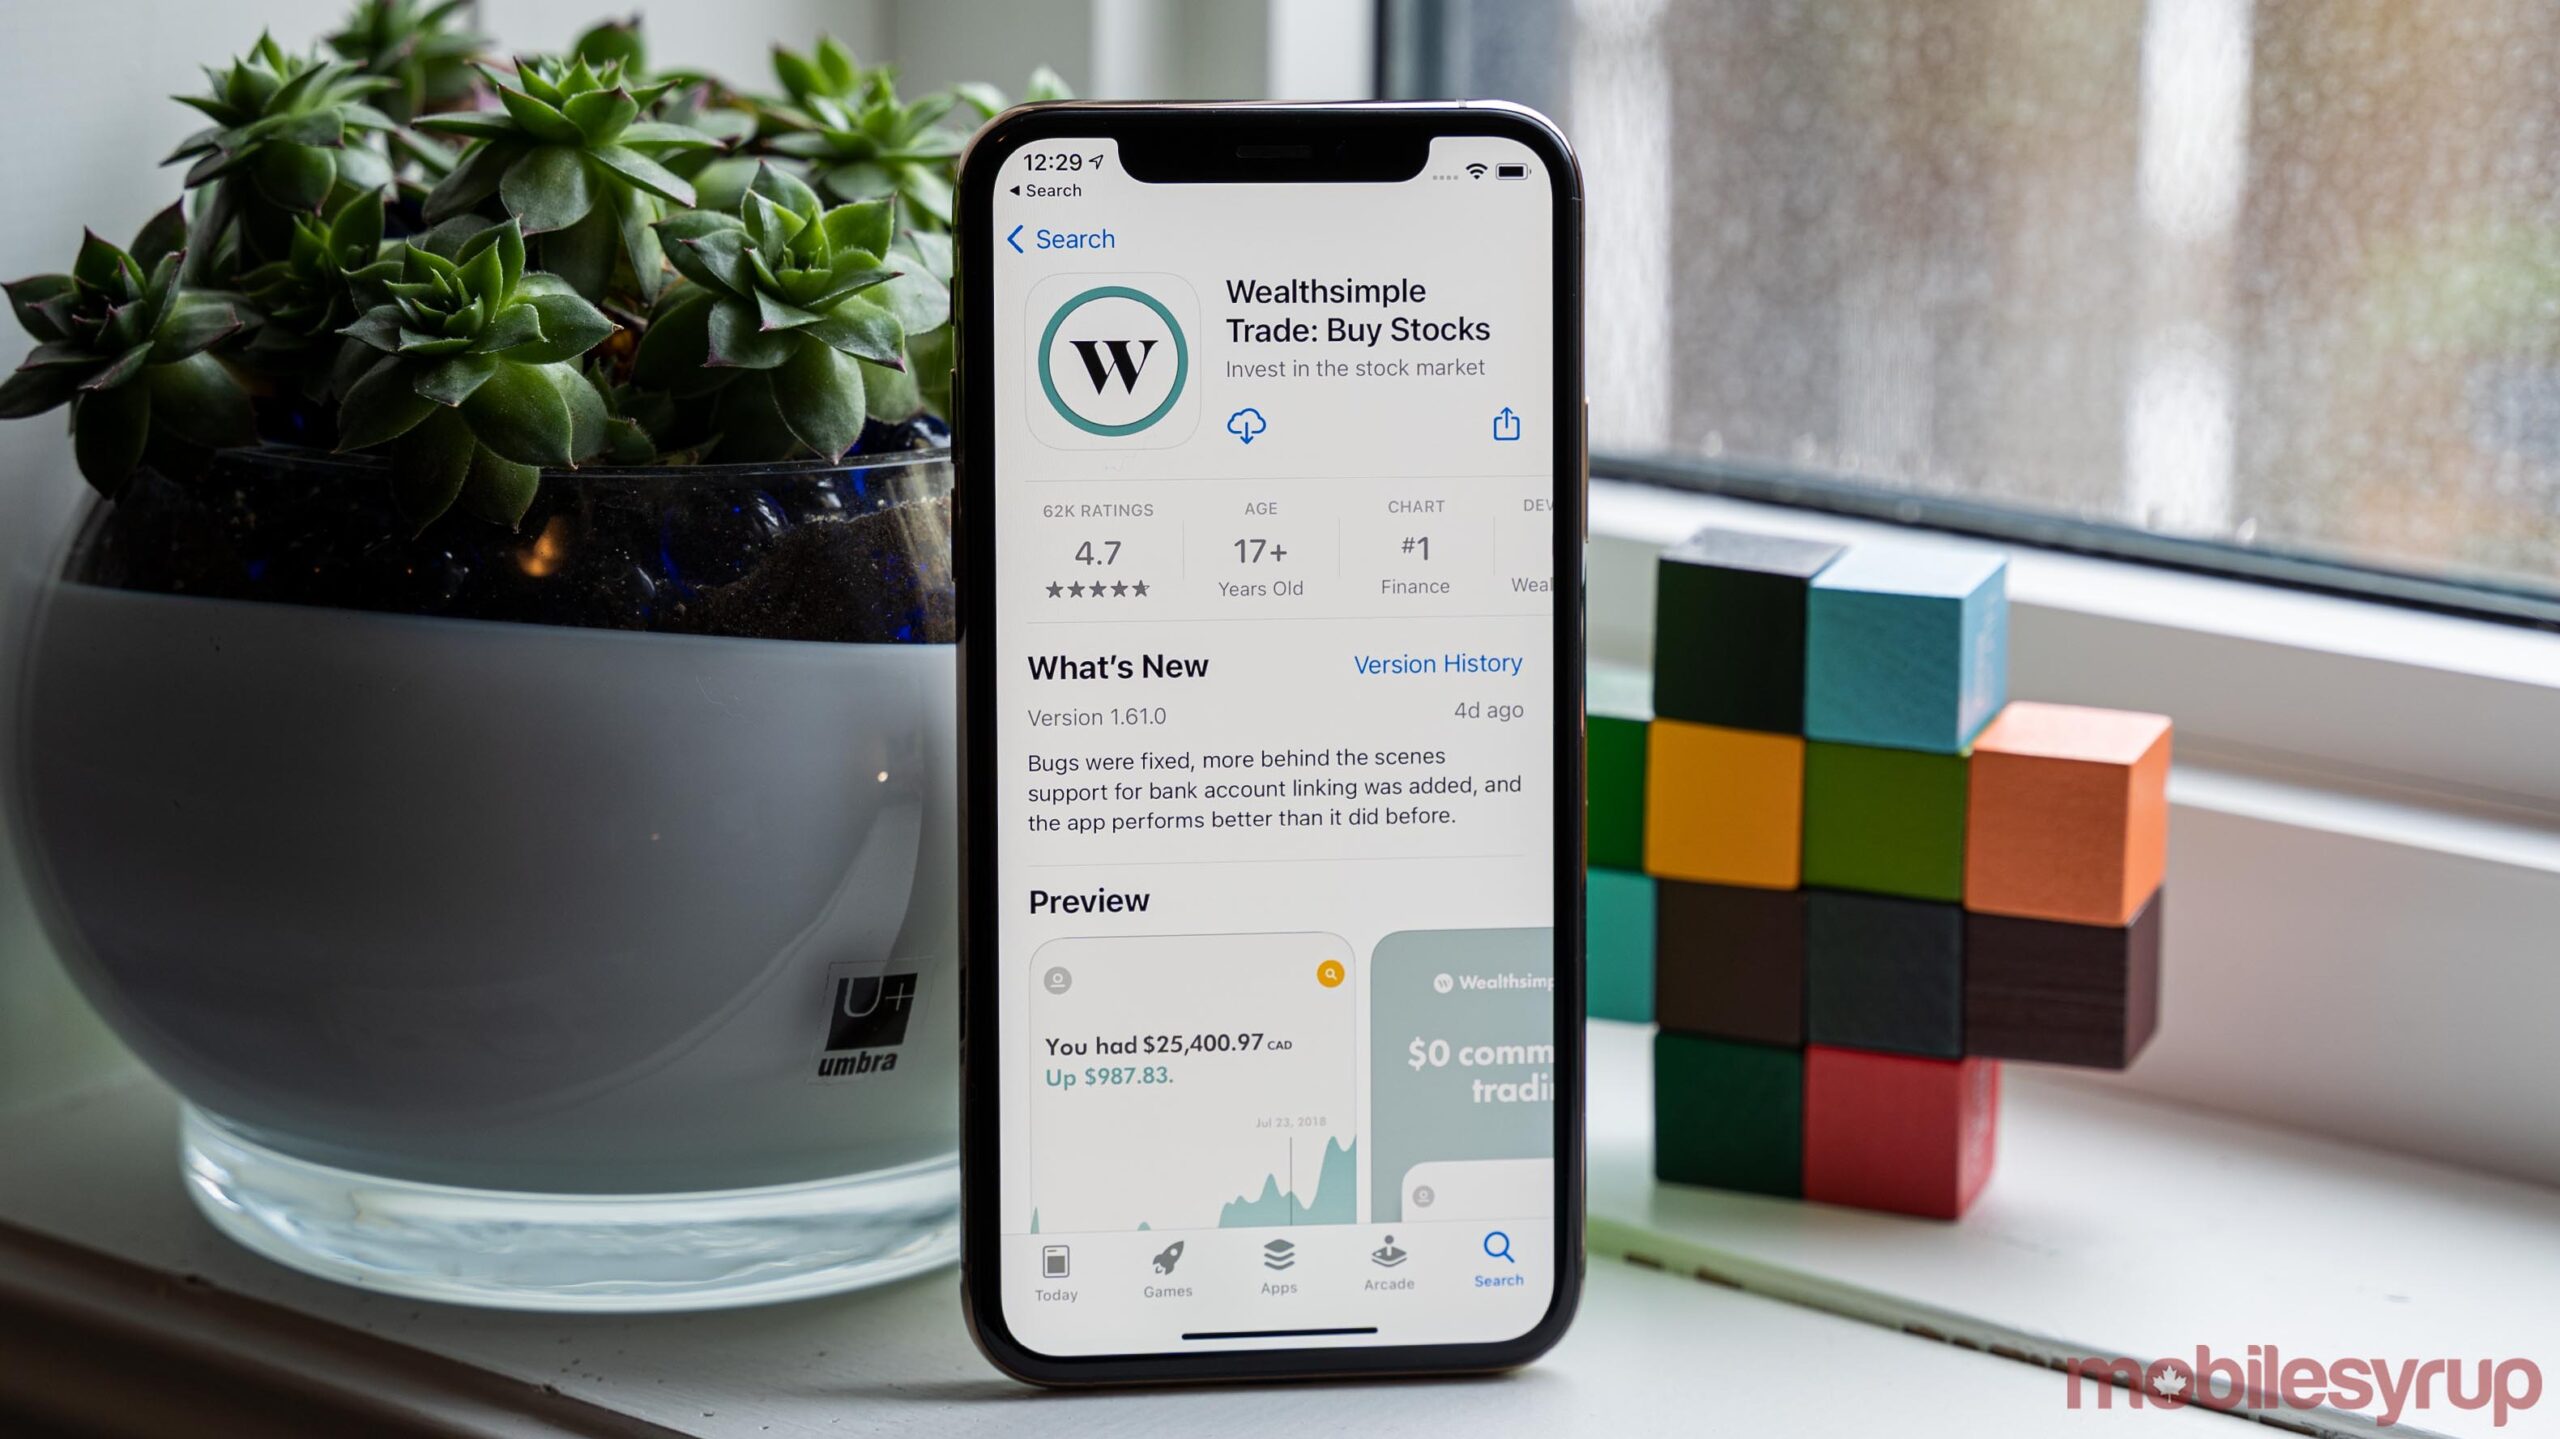 Wealthsimple Trade app on the App Store